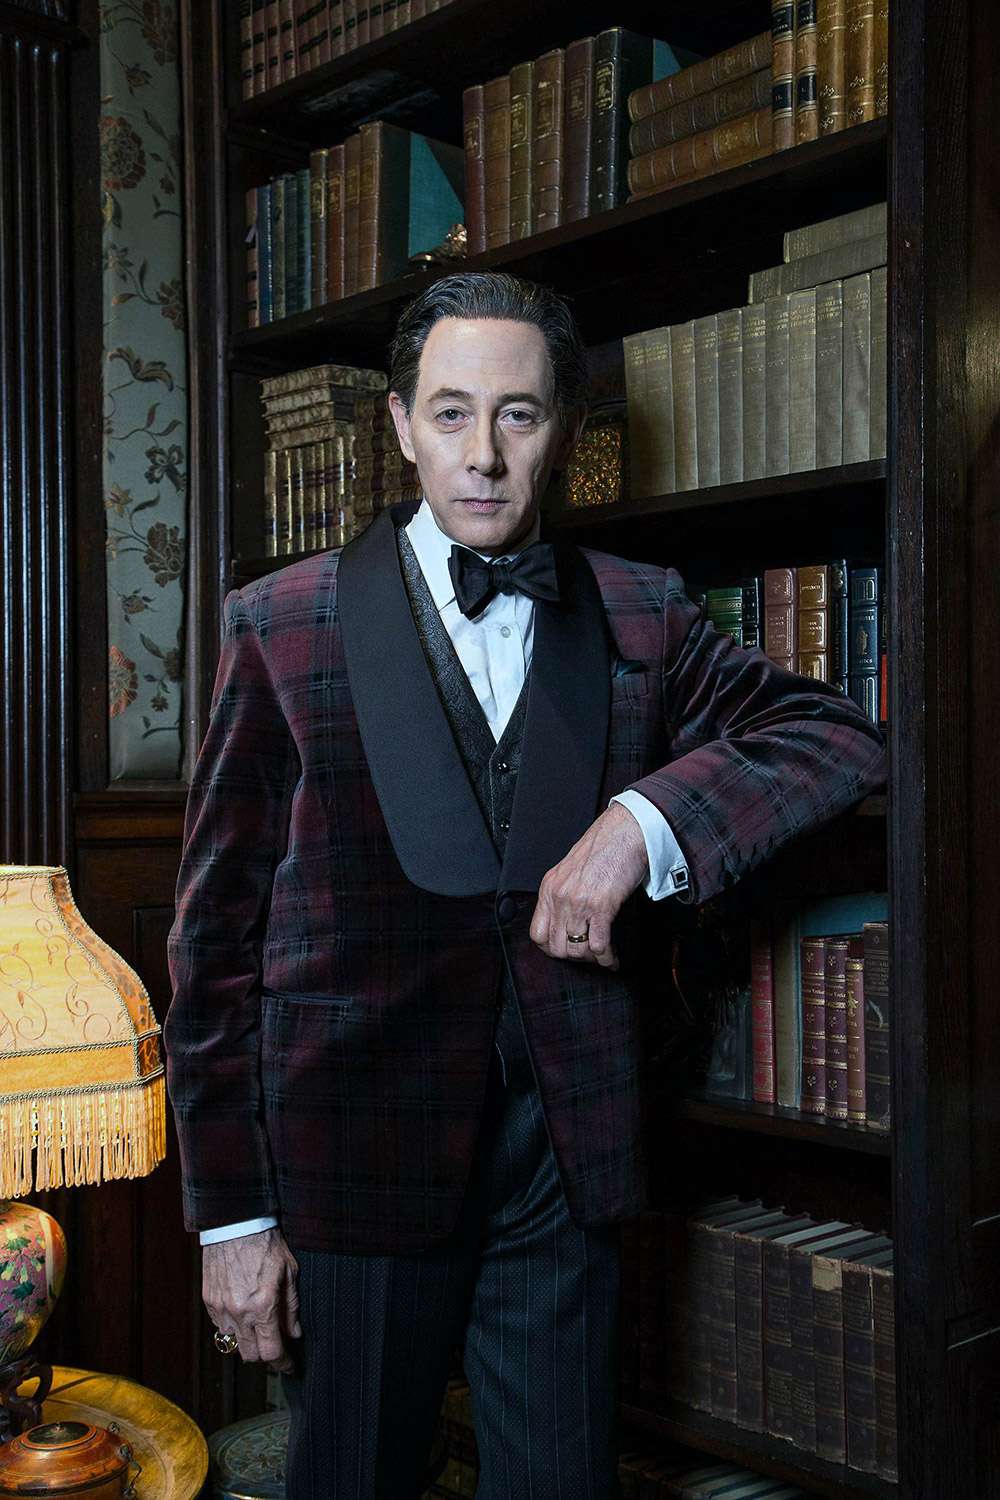 Paul Reubens in the "Wrath of the Villains: Mad Grey Dawn" episode of GOTHAM airing Monday, March 21